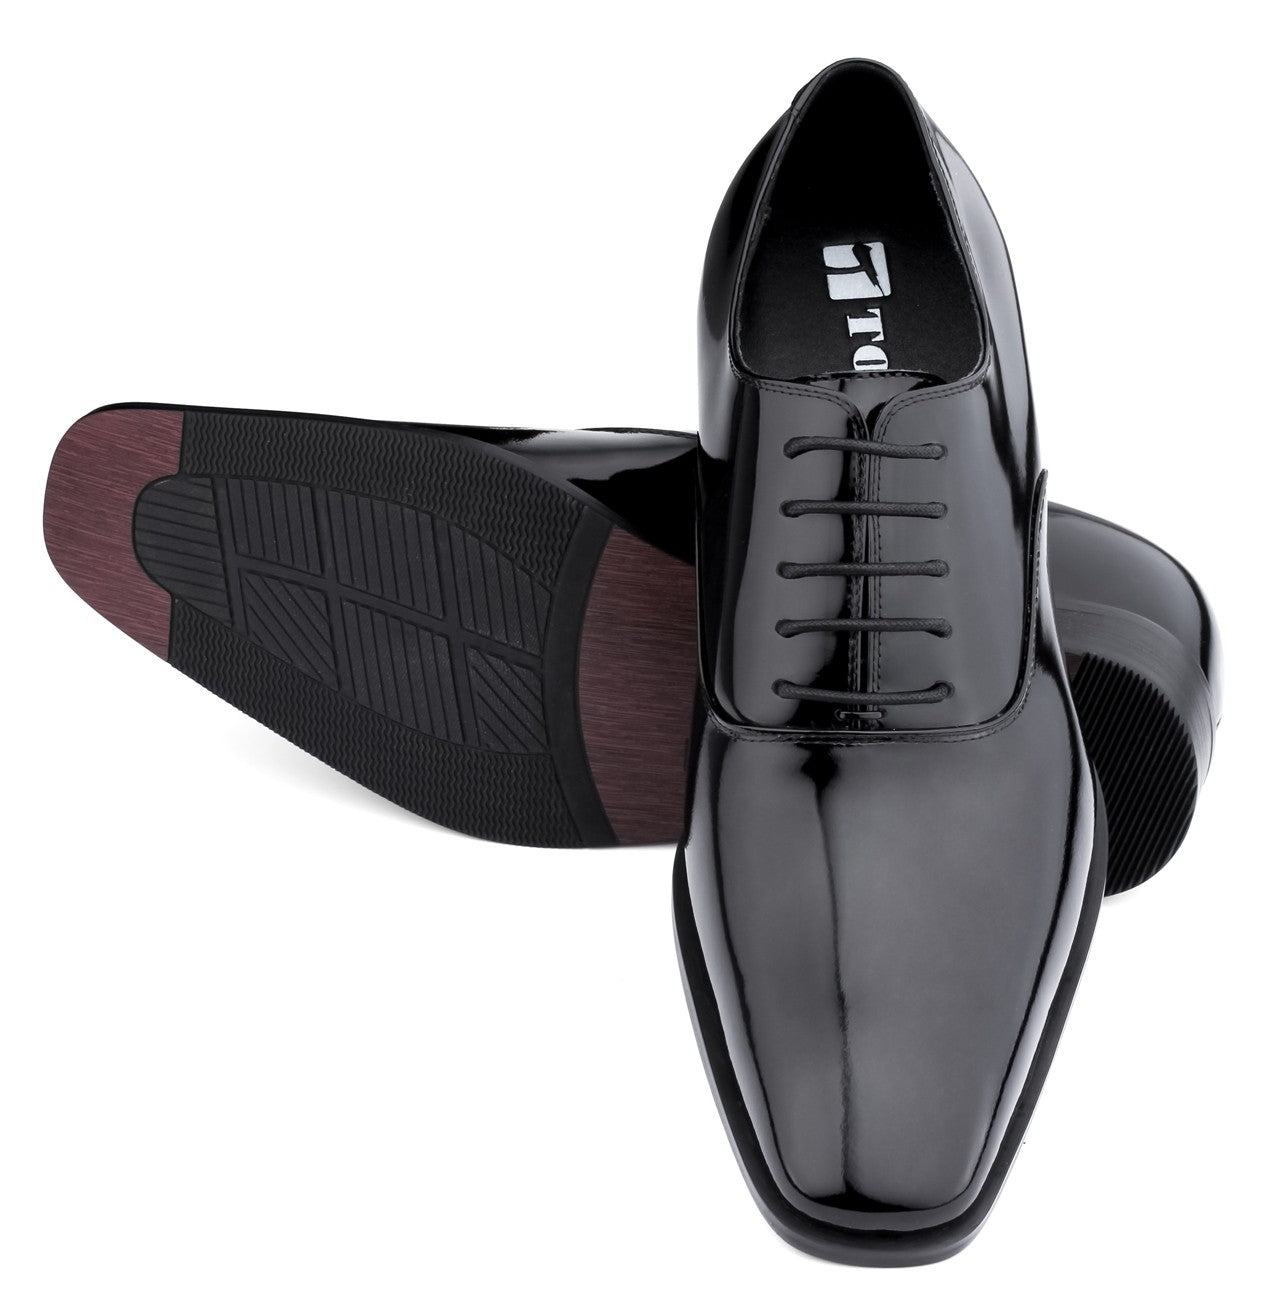 Elevator shoes height increase TOTO Oxford Patent Leather Formal Dress Shoes - Three Inches - H6532B